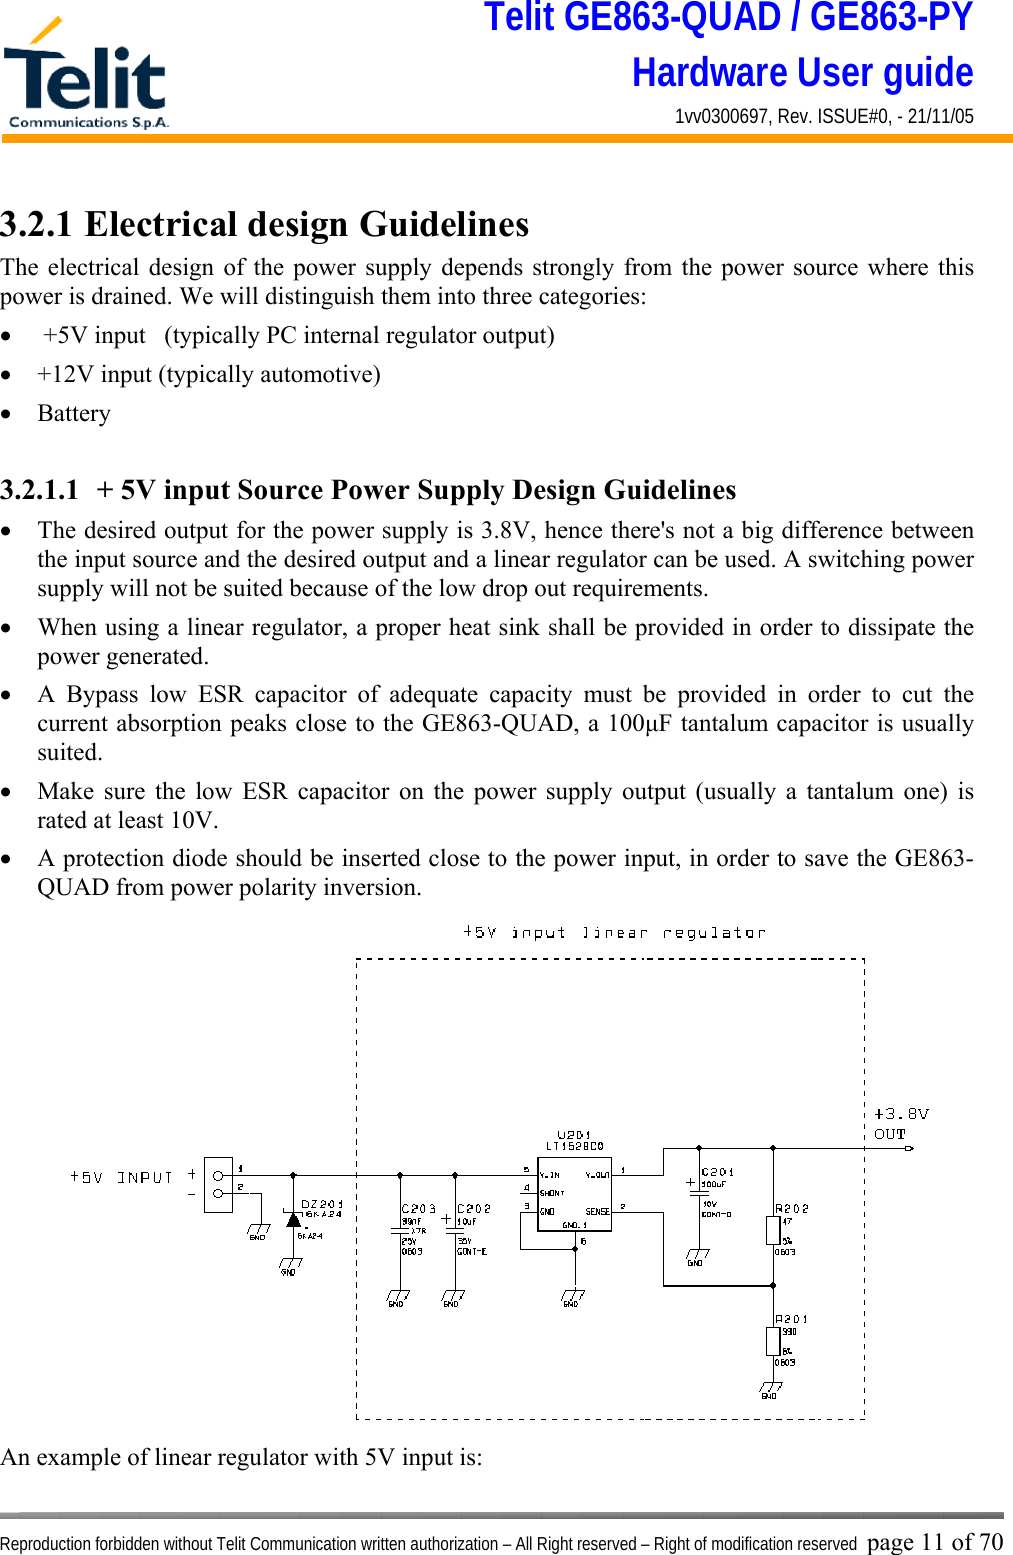 Telit GE863-QUAD / GE863-PY Hardware User guide 1vv0300697, Rev. ISSUE#0, - 21/11/05    Reproduction forbidden without Telit Communication written authorization – All Right reserved – Right of modification reserved page 11 of 70 3.2.1 Electrical design Guidelines The electrical design of the power supply depends strongly from the power source where this power is drained. We will distinguish them into three categories: •   +5V input   (typically PC internal regulator output) •  +12V input (typically automotive) •  Battery  3.2.1.1  + 5V input Source Power Supply Design Guidelines •  The desired output for the power supply is 3.8V, hence there&apos;s not a big difference between the input source and the desired output and a linear regulator can be used. A switching power supply will not be suited because of the low drop out requirements. •  When using a linear regulator, a proper heat sink shall be provided in order to dissipate the power generated. •  A Bypass low ESR capacitor of adequate capacity must be provided in order to cut the current absorption peaks close to the GE863-QUAD, a 100μF tantalum capacitor is usually suited. •  Make sure the low ESR capacitor on the power supply output (usually a tantalum one) is rated at least 10V. •  A protection diode should be inserted close to the power input, in order to save the GE863-QUAD from power polarity inversion. An example of linear regulator with 5V input is: 